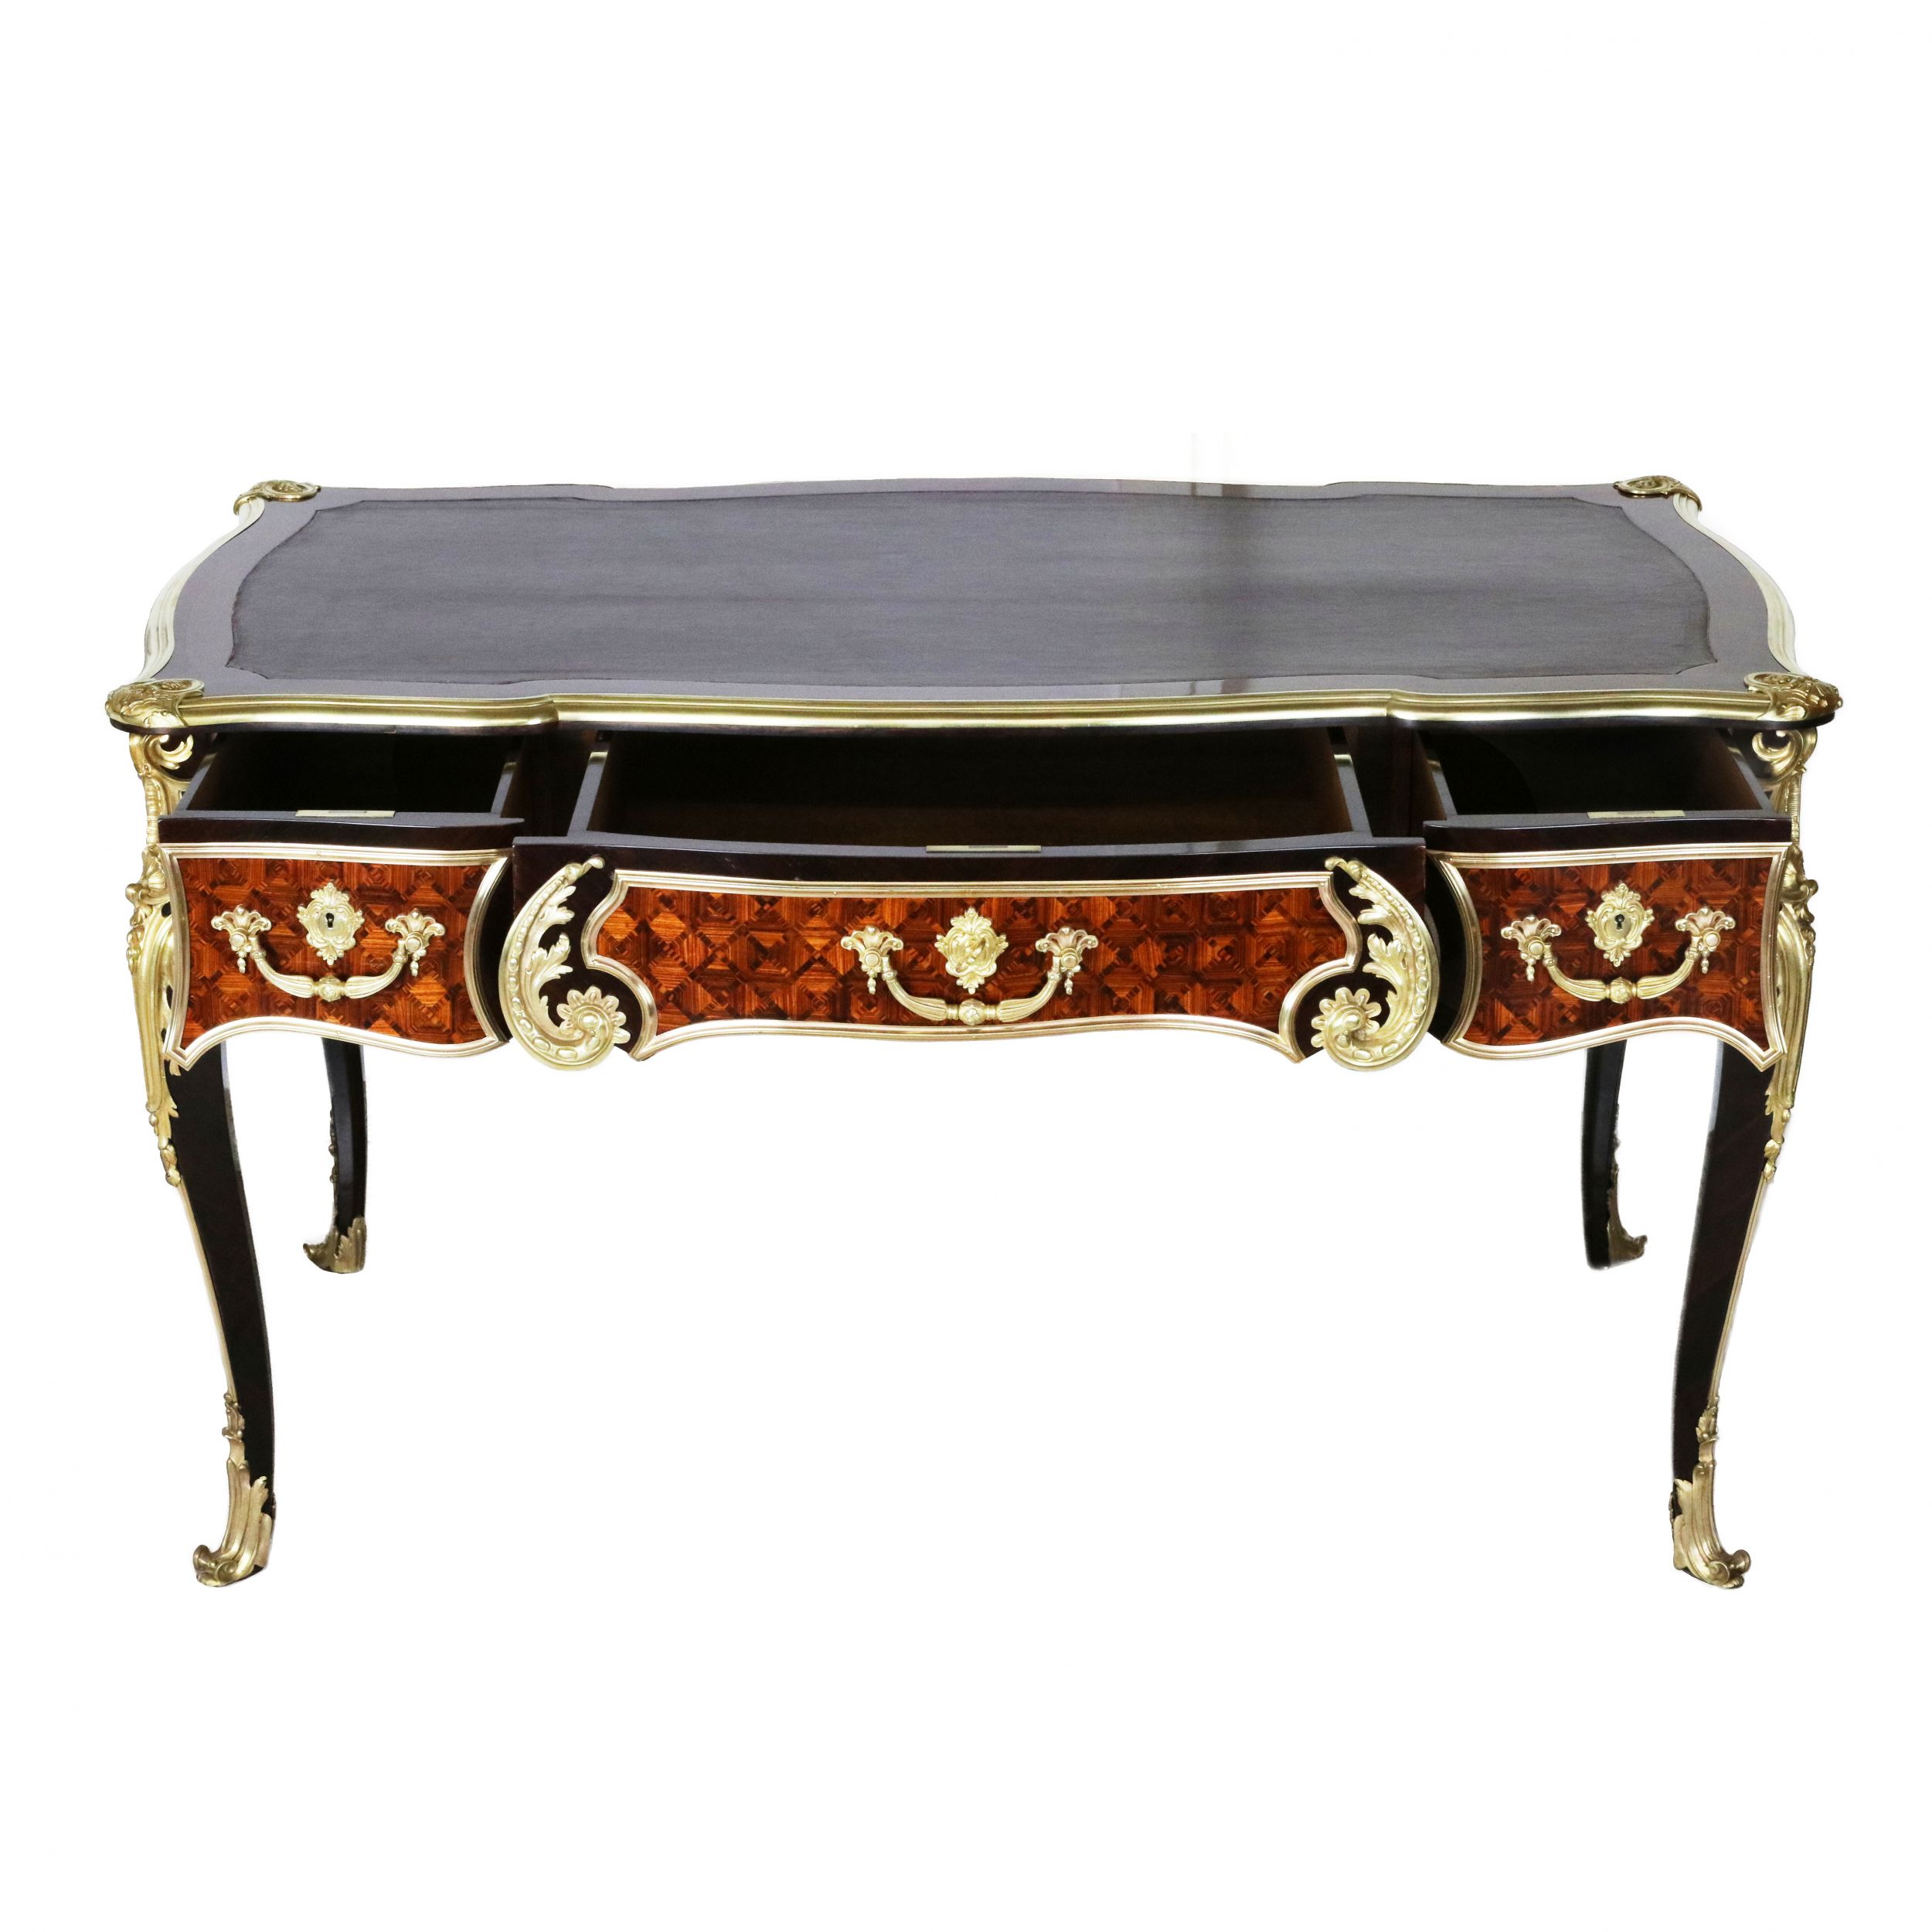 Magnificent writing desk in wood and gilded bronze, Louis XV style. - Image 3 of 8